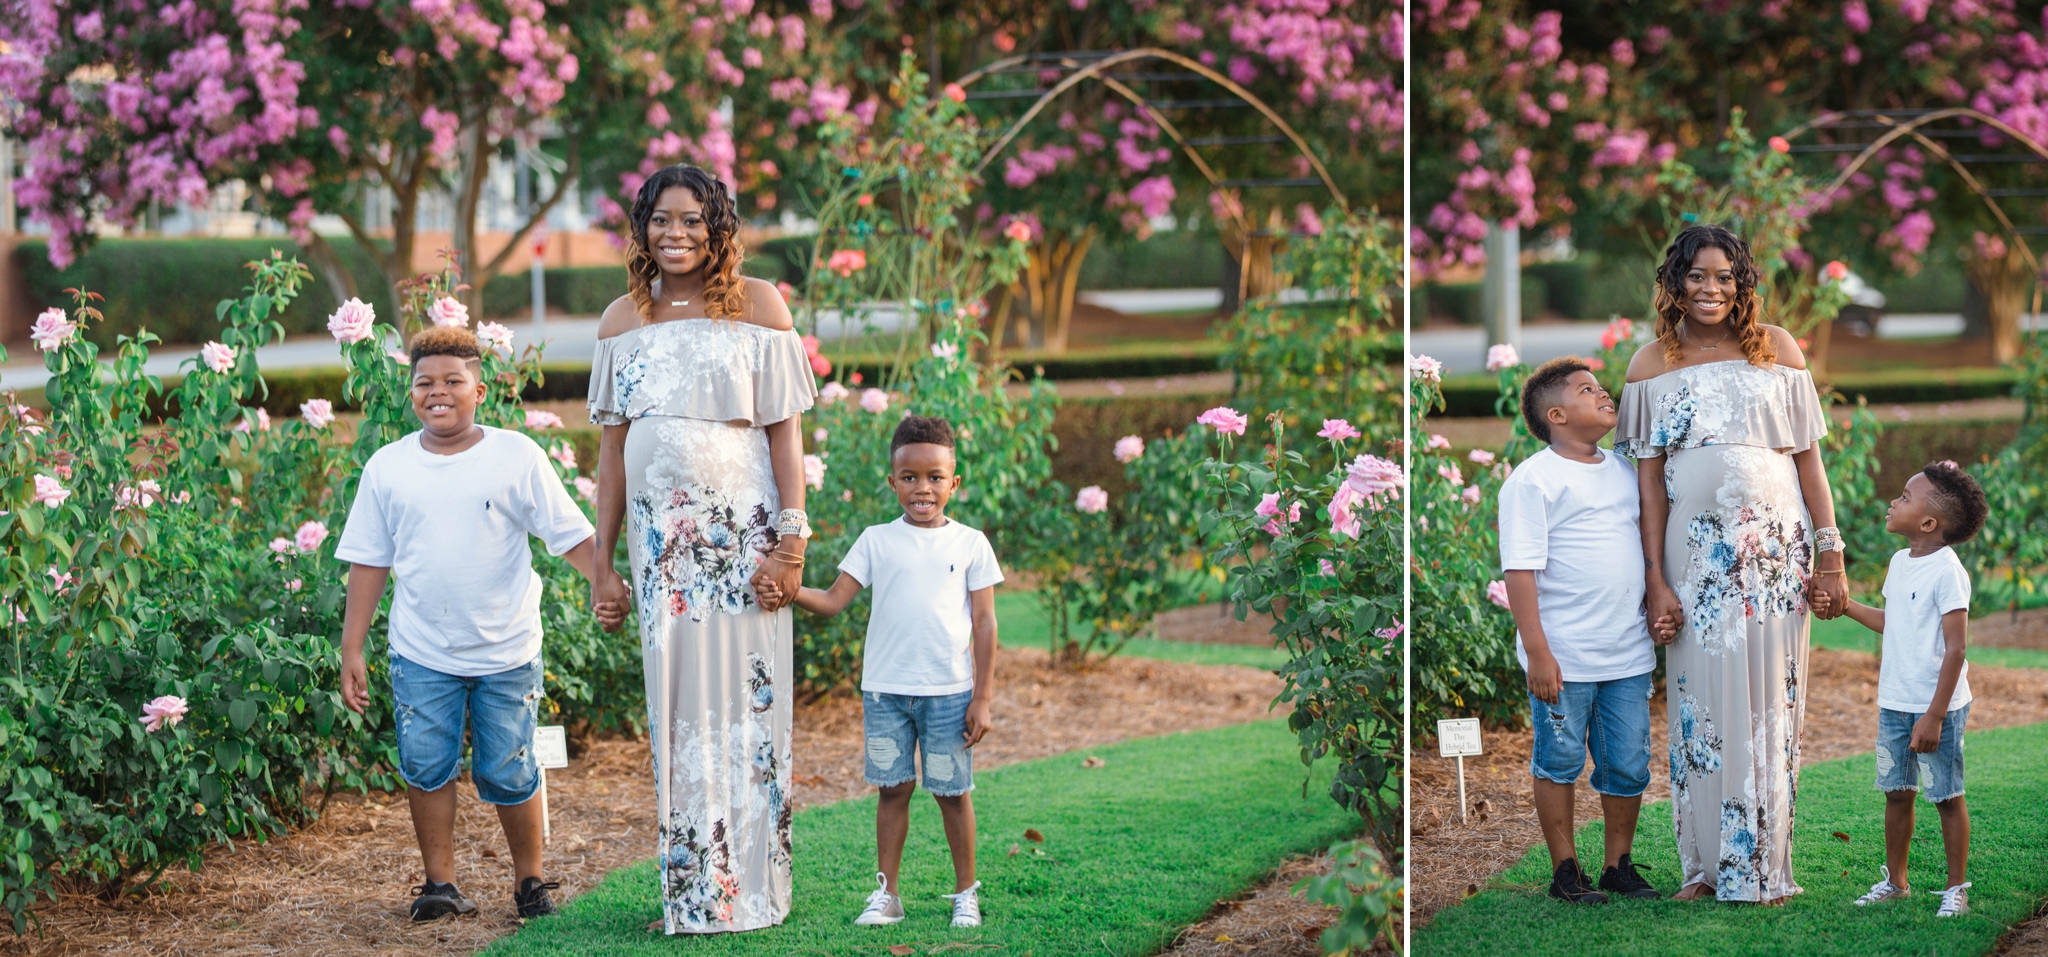 Maternity Photography Session at the FTCC Rose Garden in Fayetteville North Carolina 7.jpg